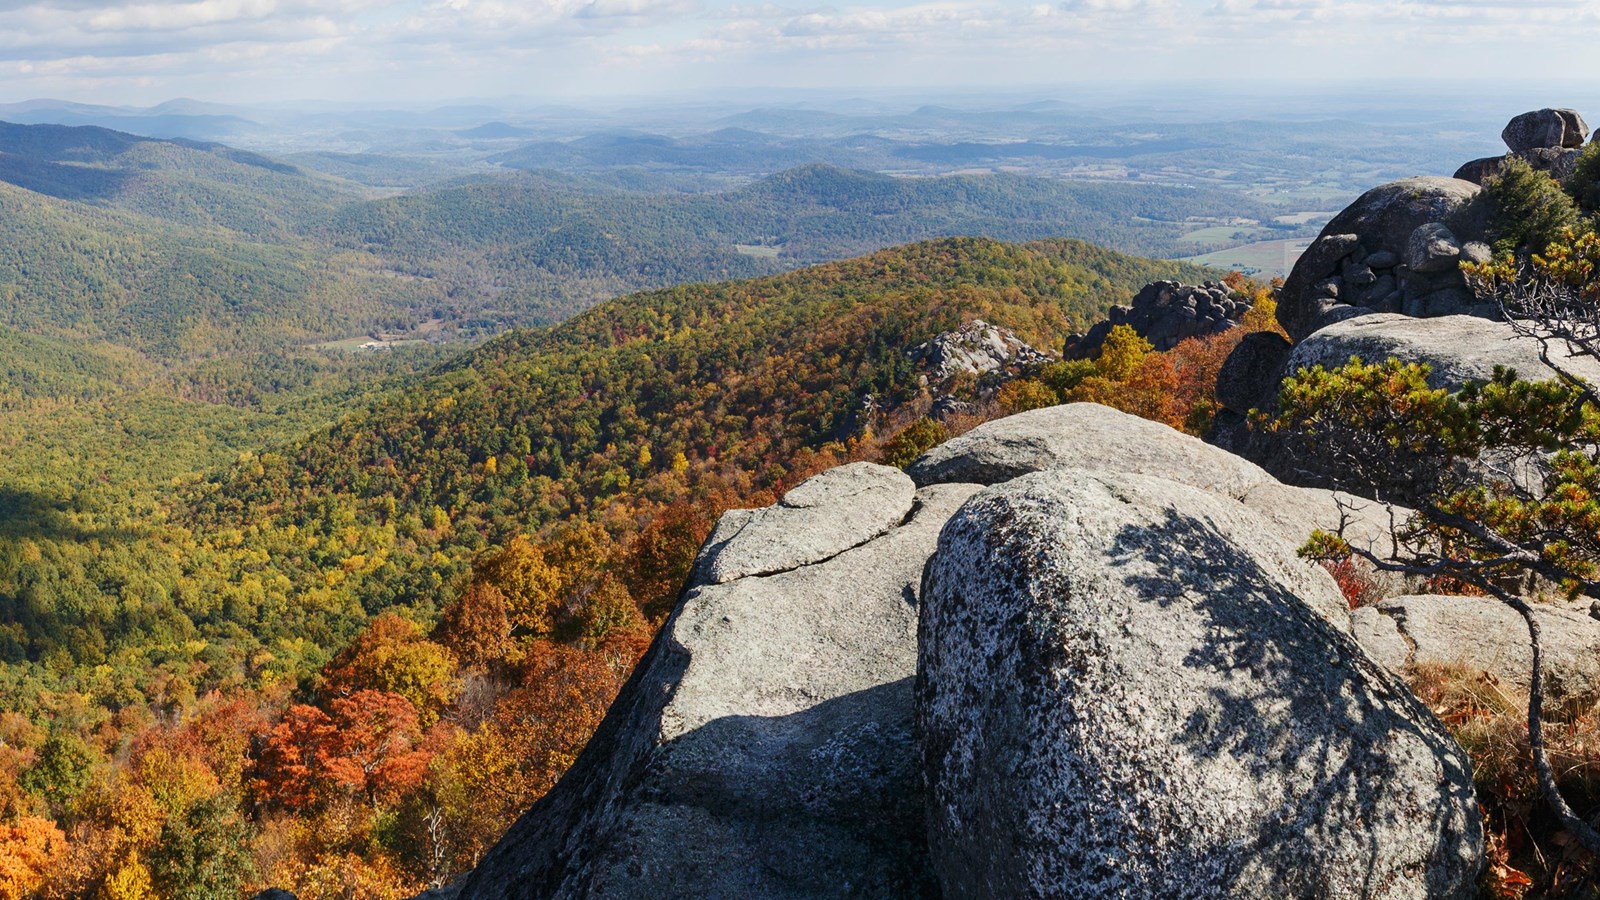 A rock outcrop overlooks mountain layers below, exploding with fall colors: red, orange, and yellow